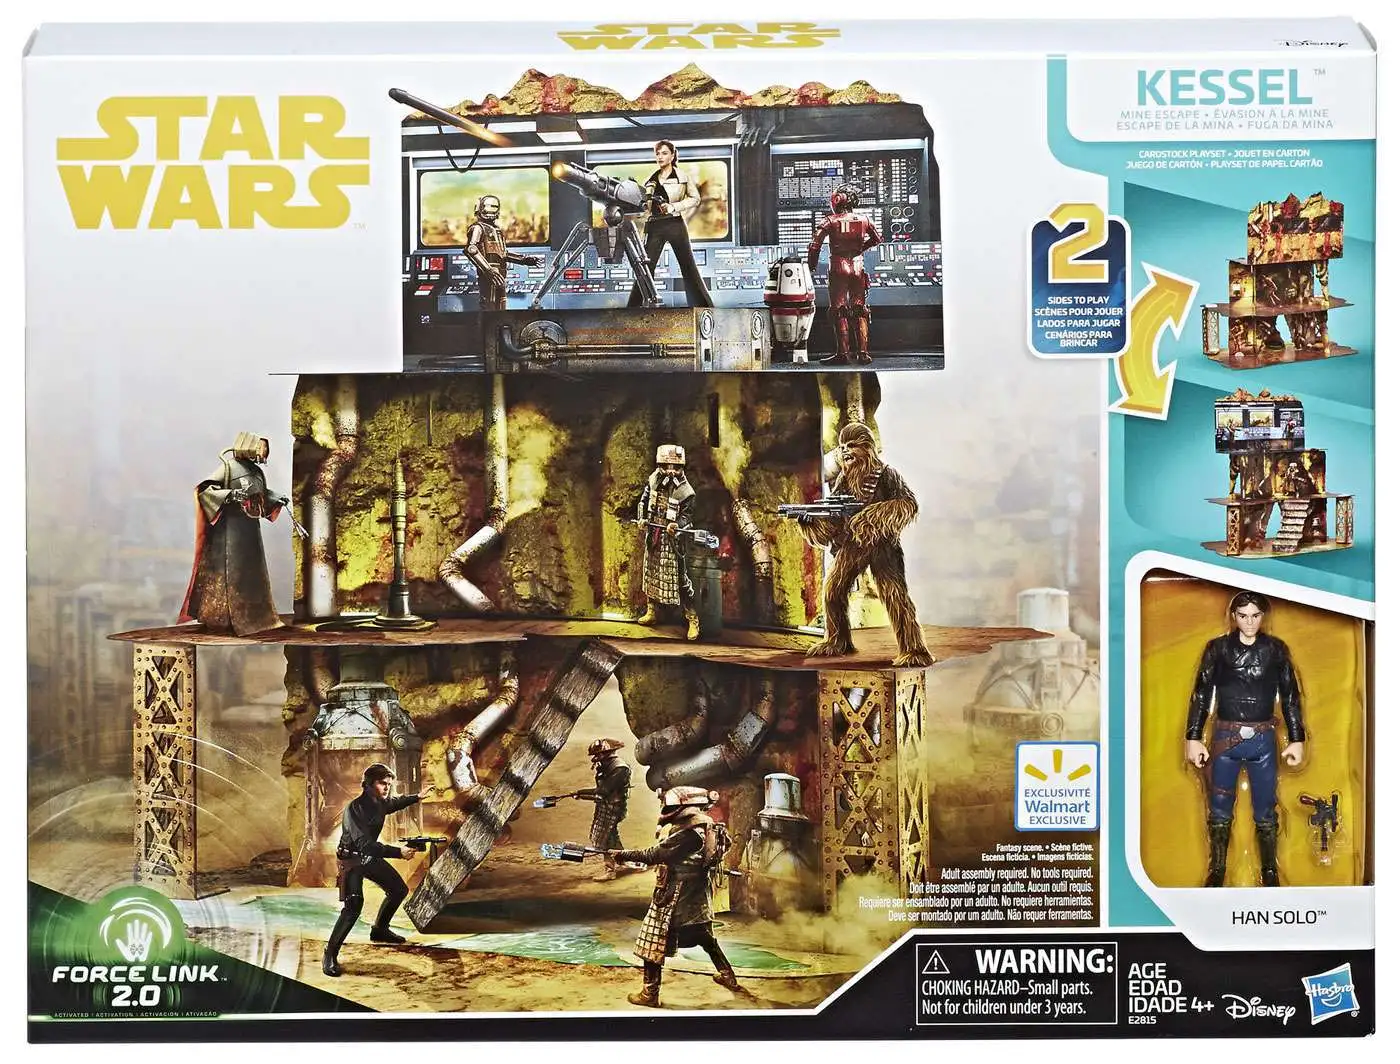 New Toys Figure Co Details about   Star Wars Solo Force Link 2.0 Kessel Mine Escape Playset 